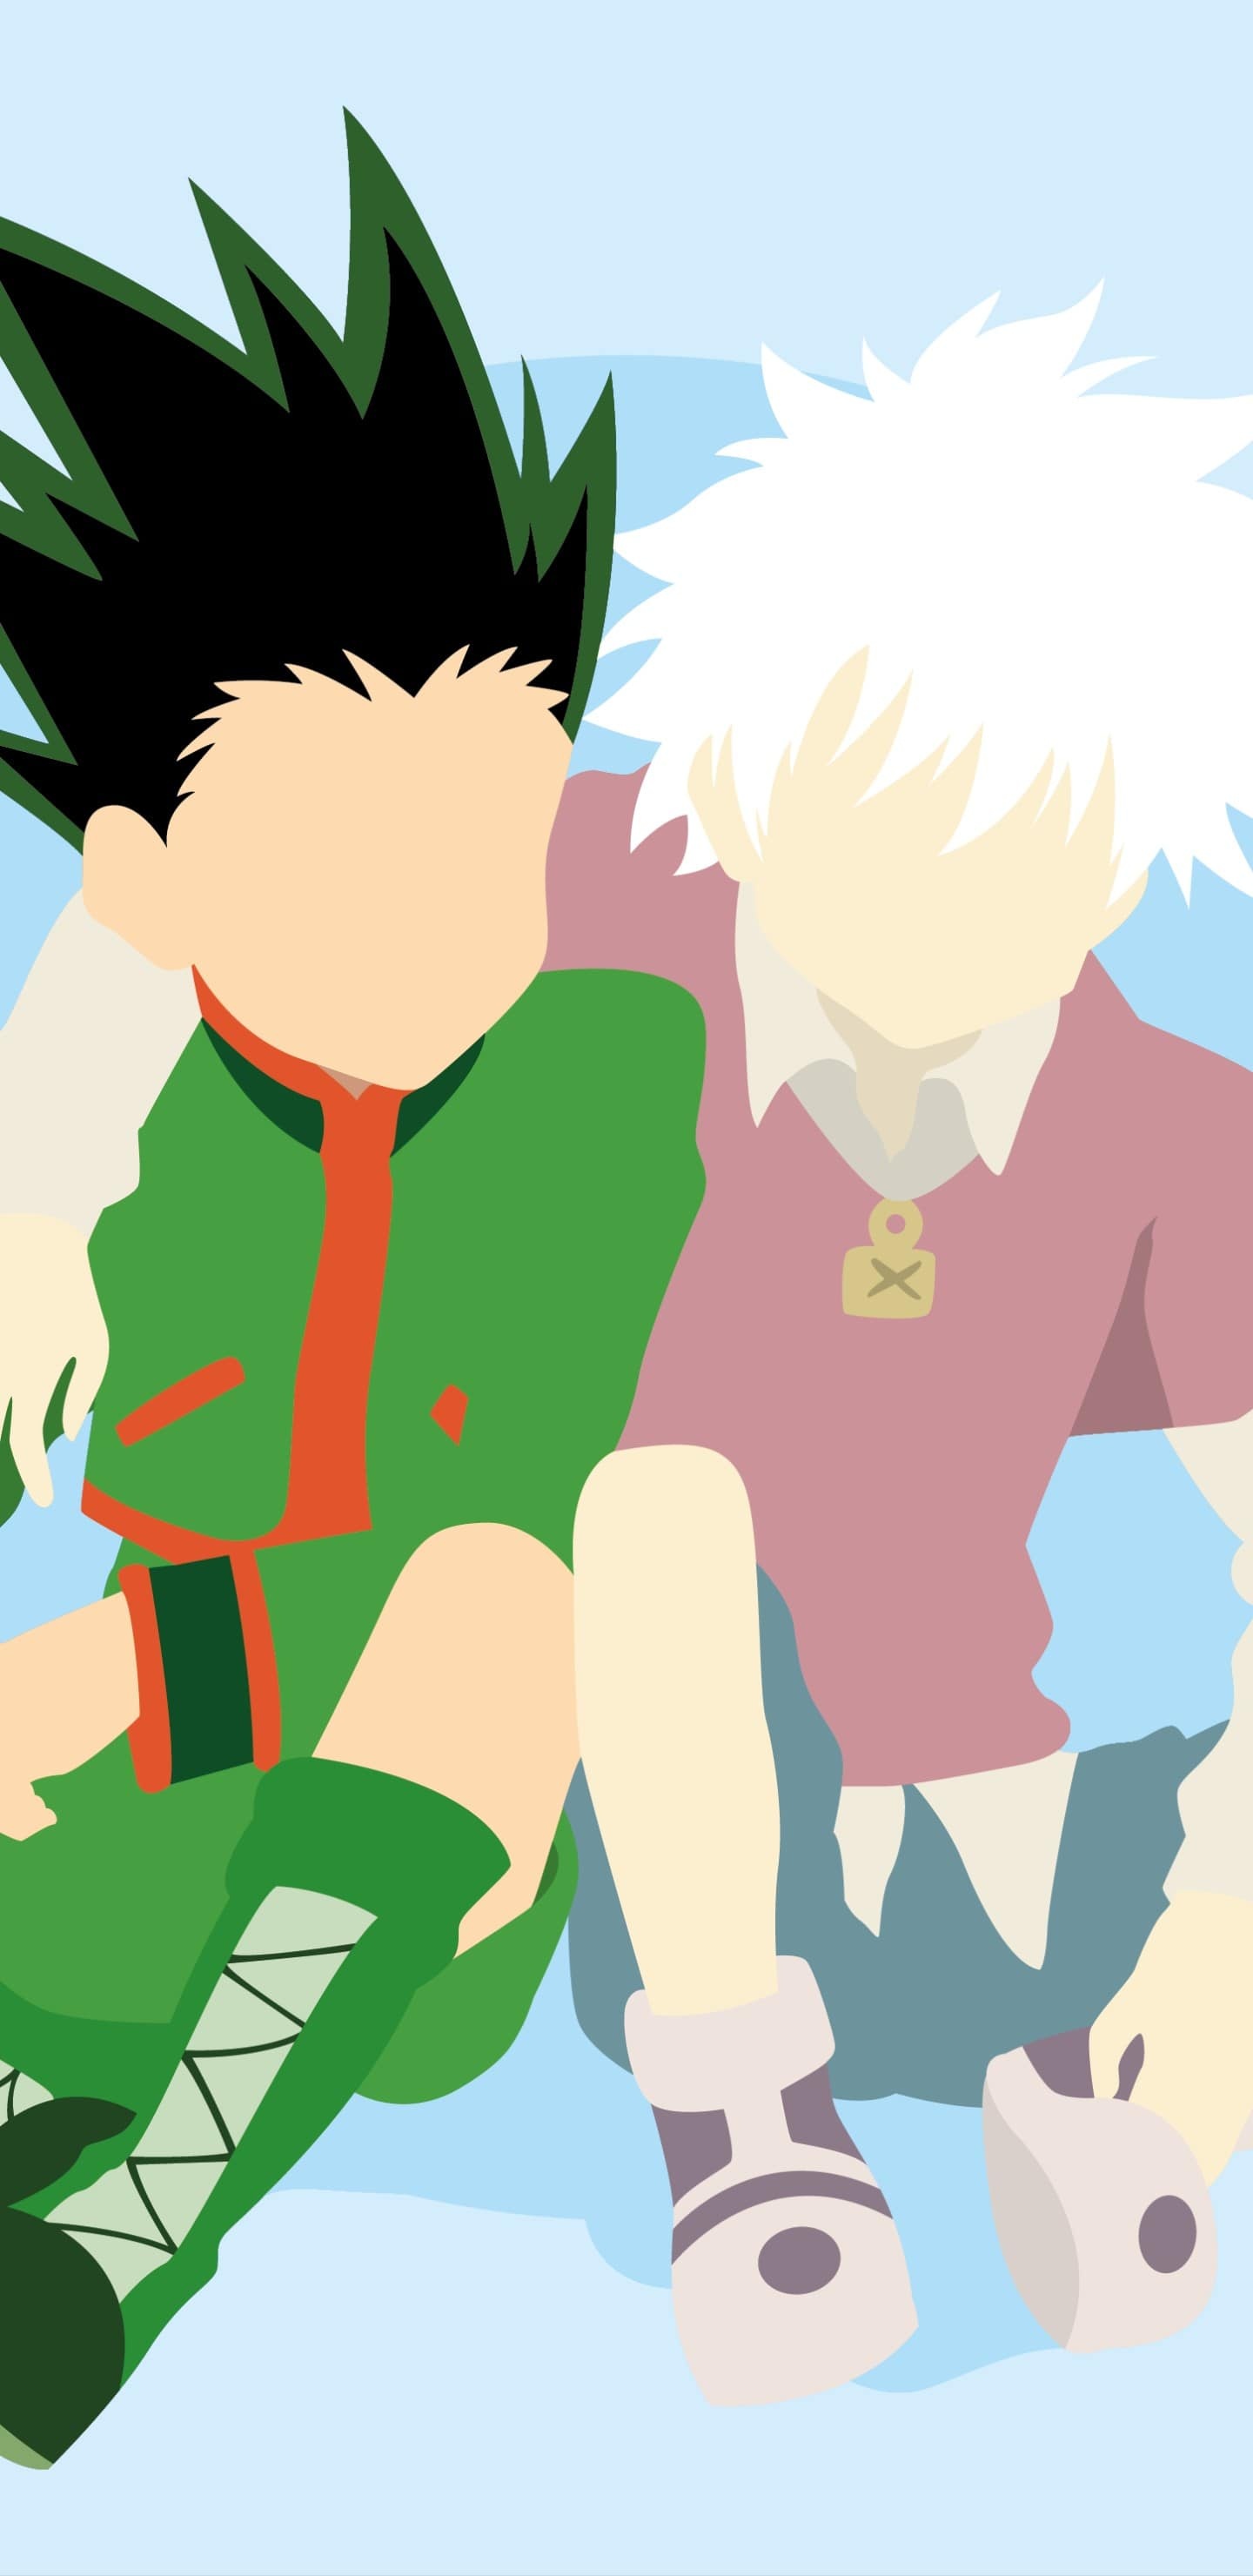 Gon and Killua: A 62-episode anime television series produced by Nippon Animation and directed by Kazuhiro Furuhashi. 1440x2960 HD Wallpaper.